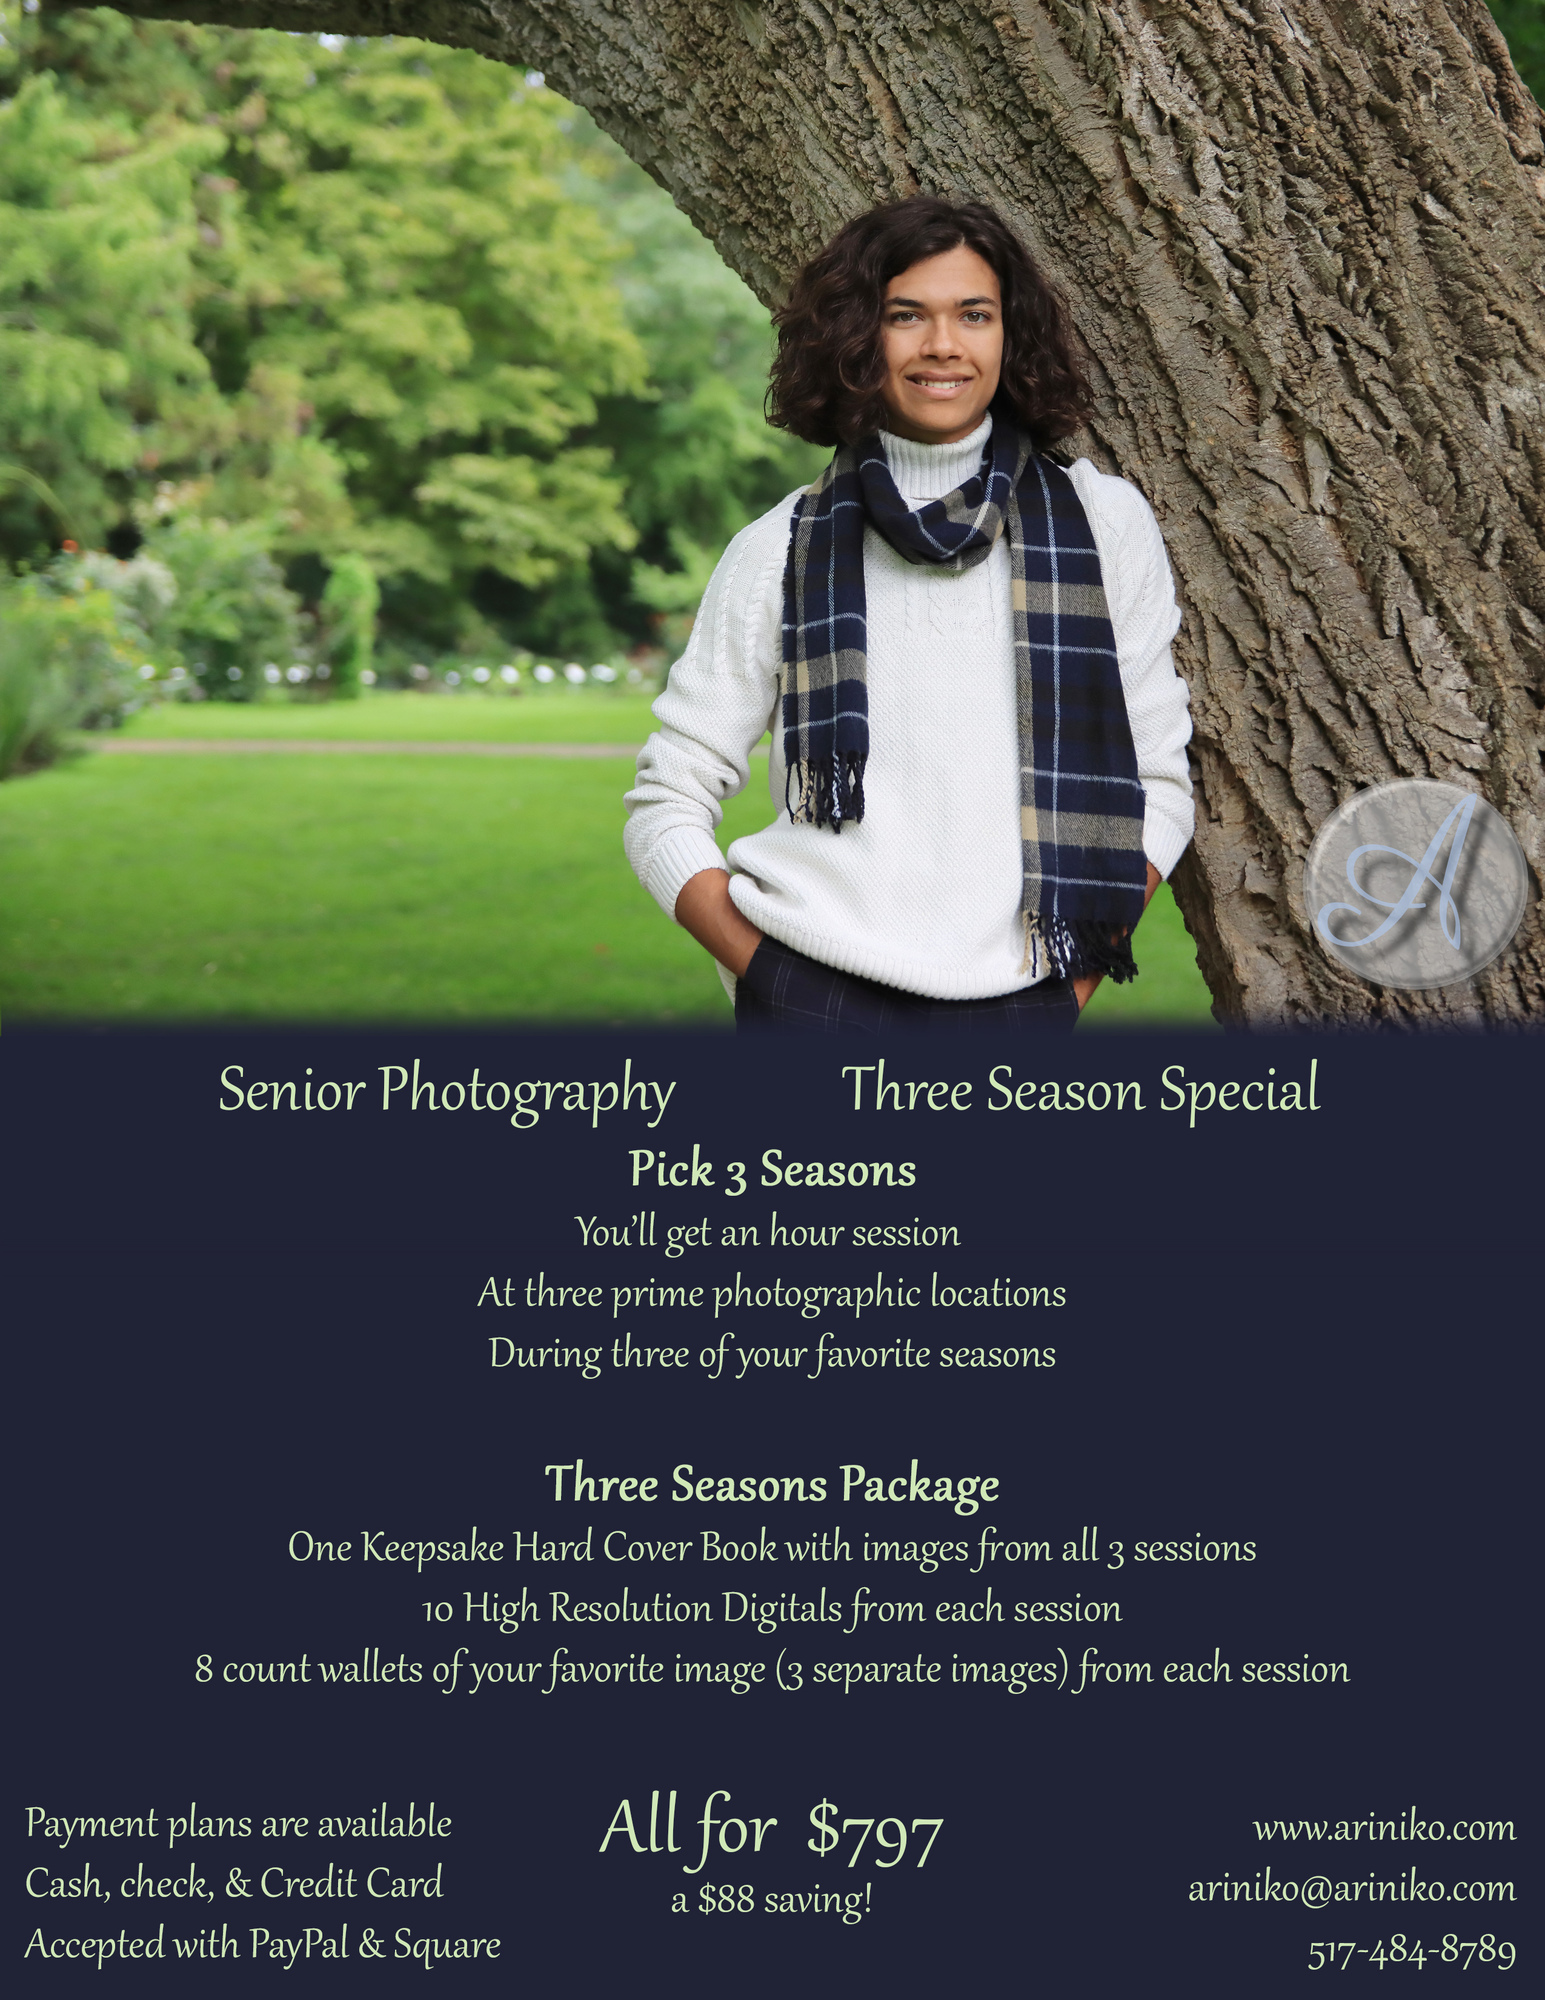 Senior Portraits Three-Season Guide has a young person wearing a white sweater with a blue scarf. They are leaning against an ol